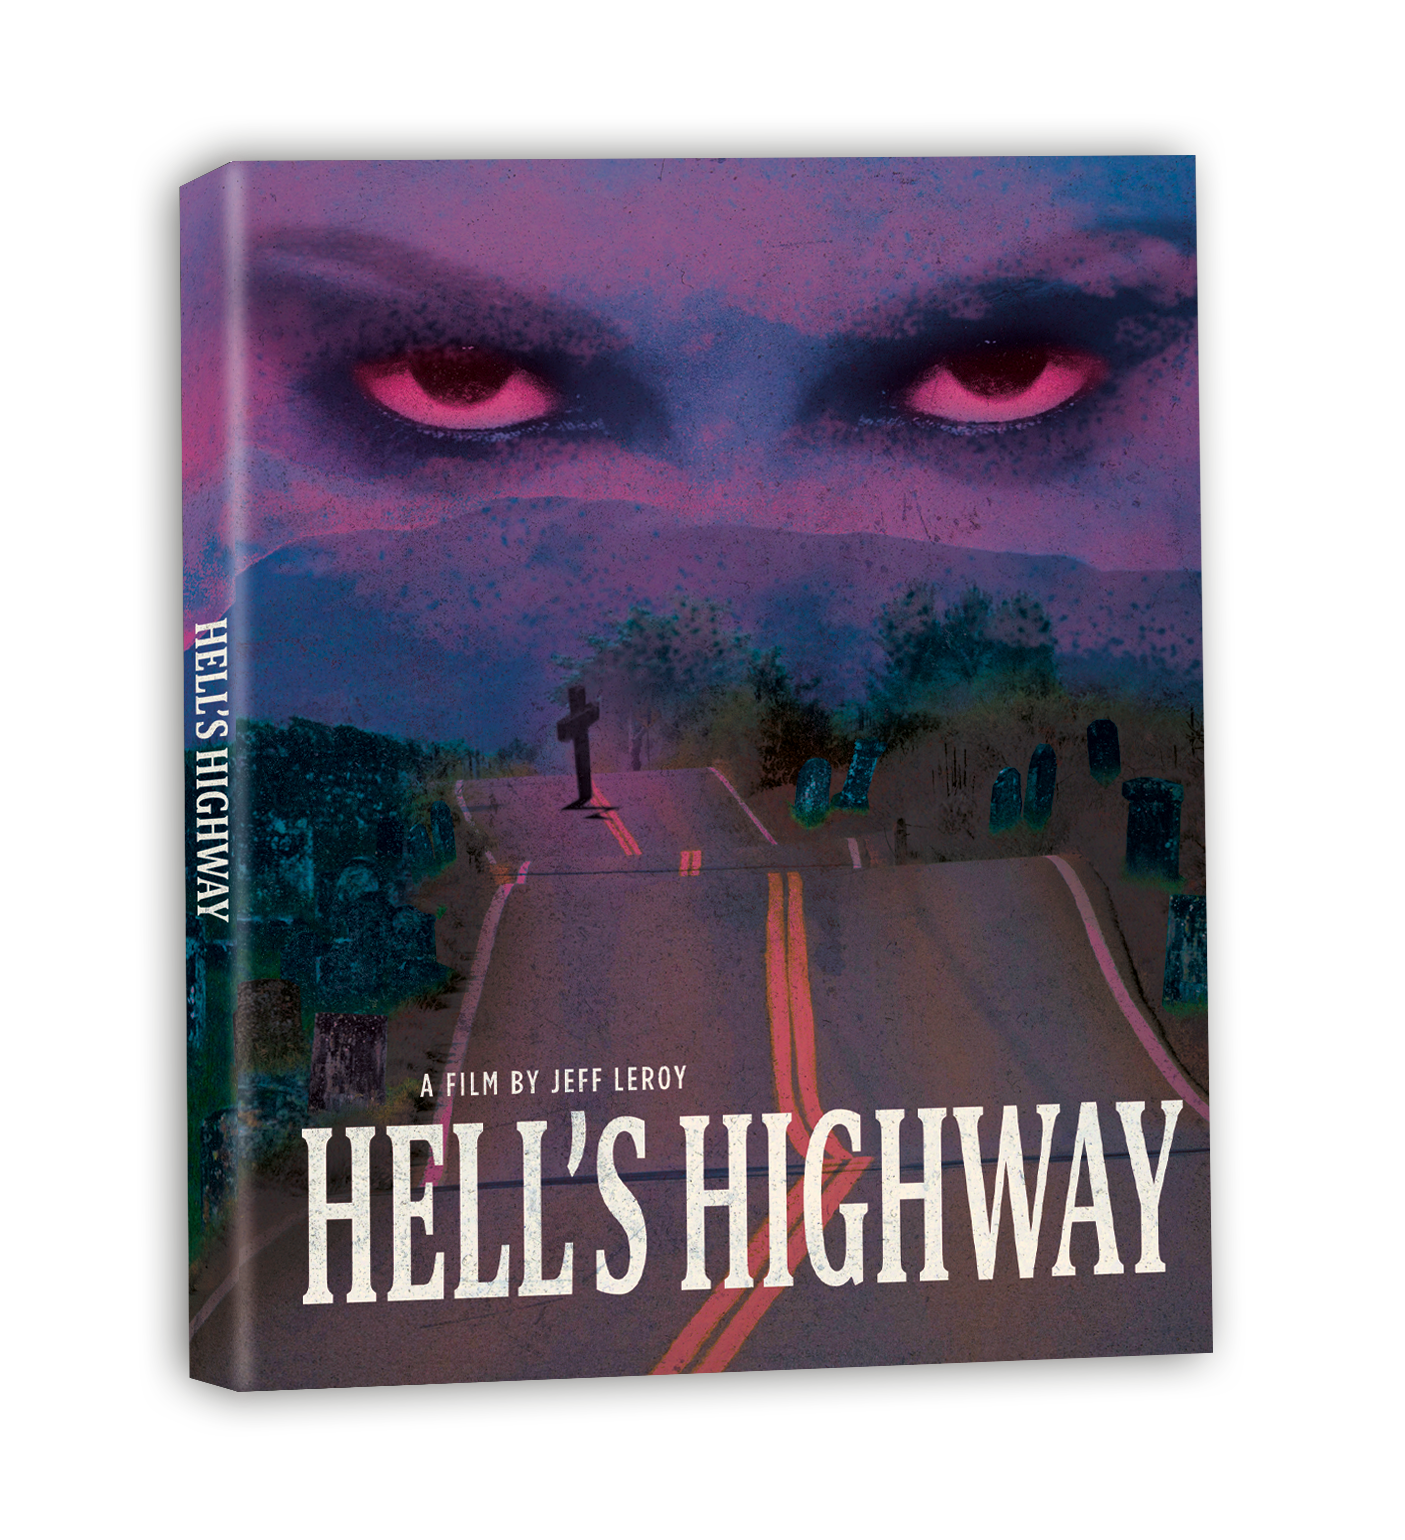 Hell's Highway (2002) Blu-ray — Terror Vision Records and Video